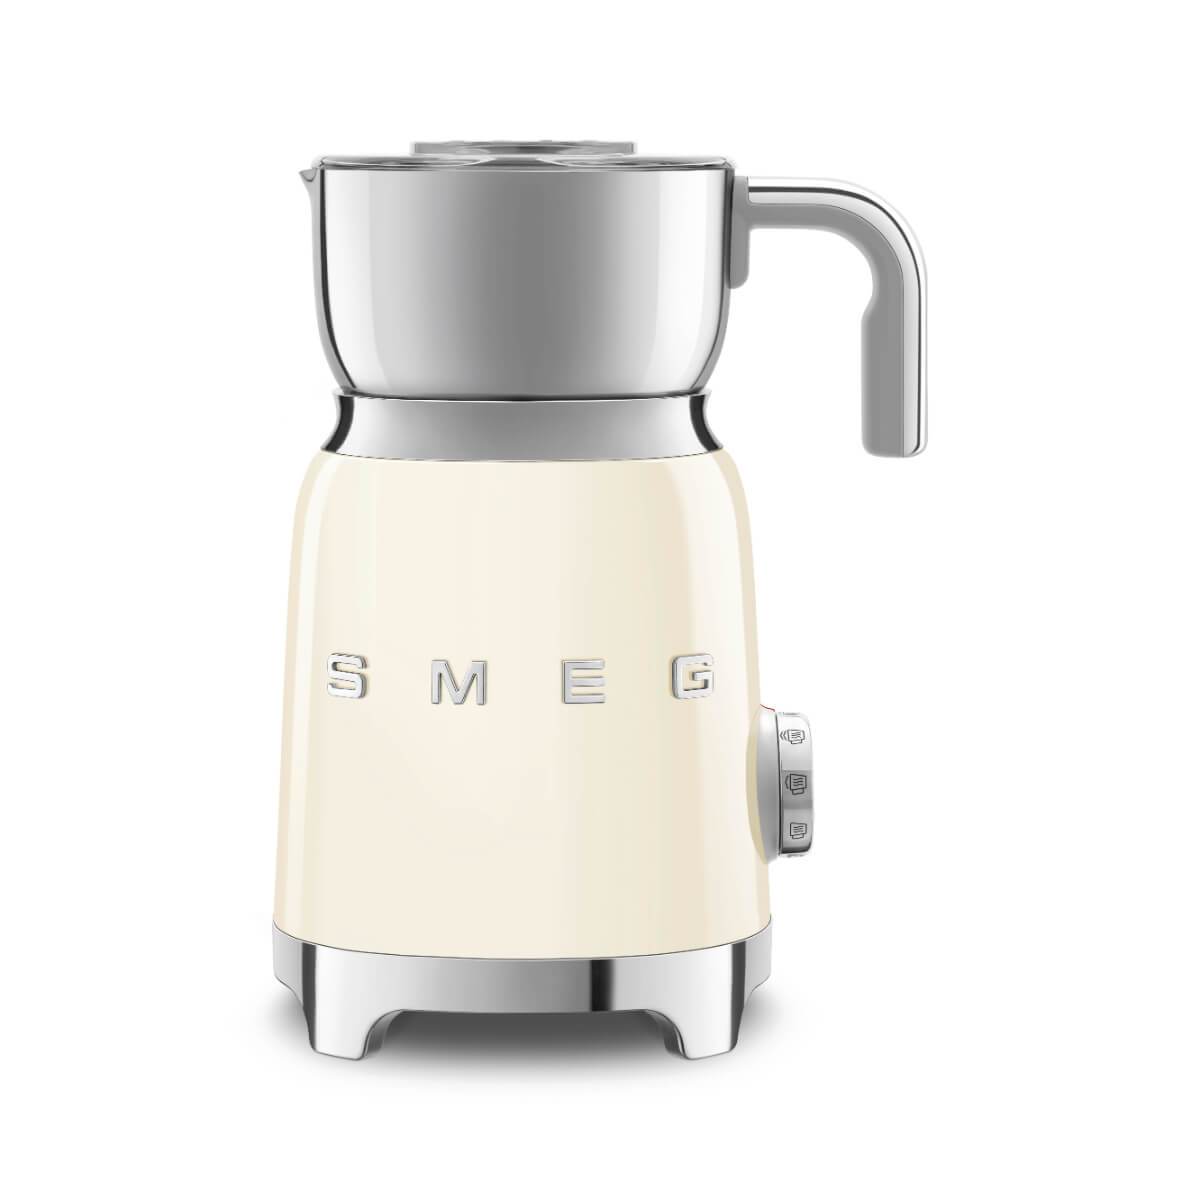 Smeg 50's Style Milk Frother - Cream Color